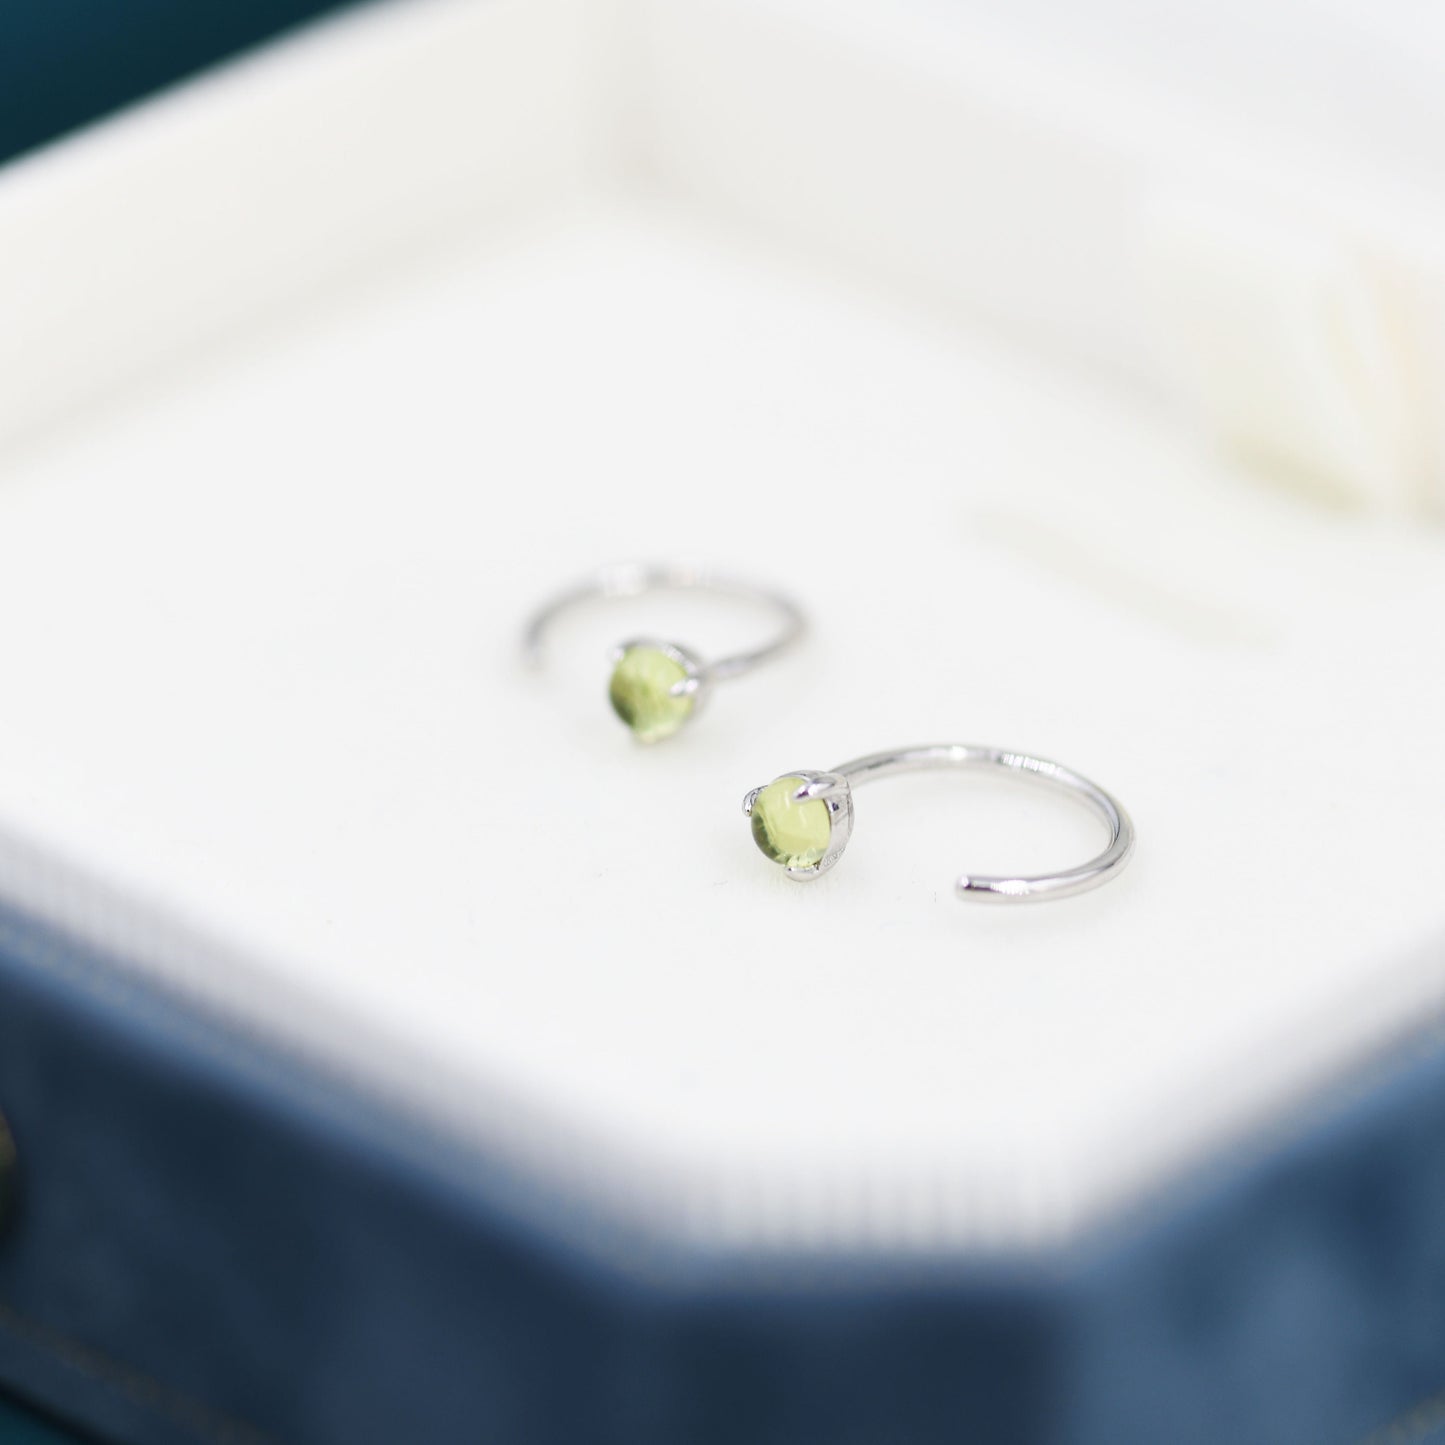 Natural Peridot Huggie Hoop Threader Earrings in Sterling Silver, 3mm Three Prong, Gold or Silver, Pull Through Open Hoops